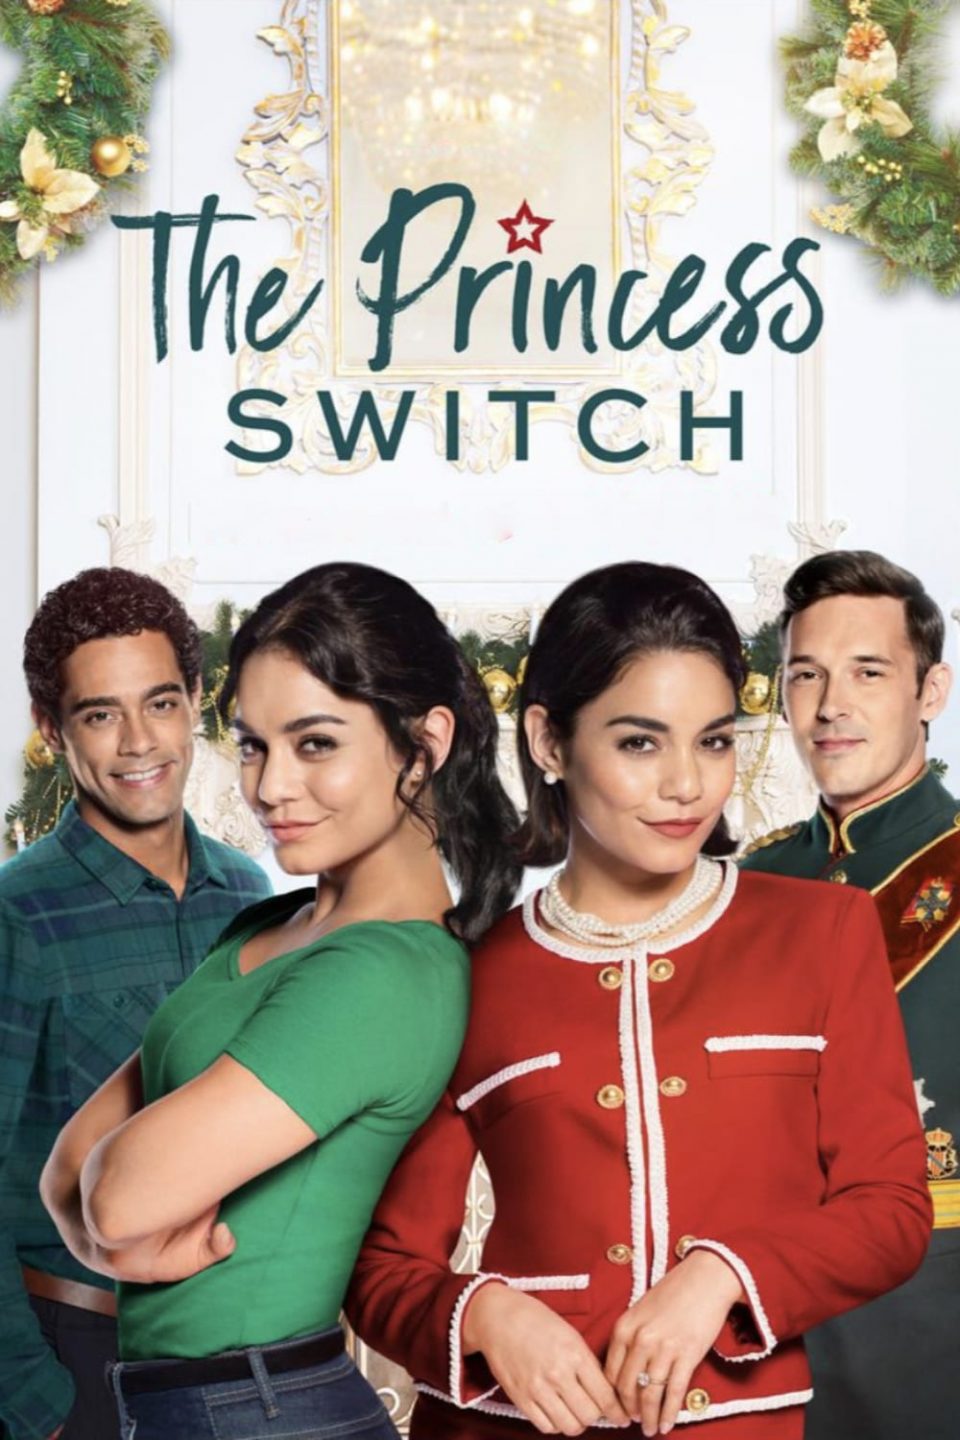 Poster for the movie "The Princess Switch"